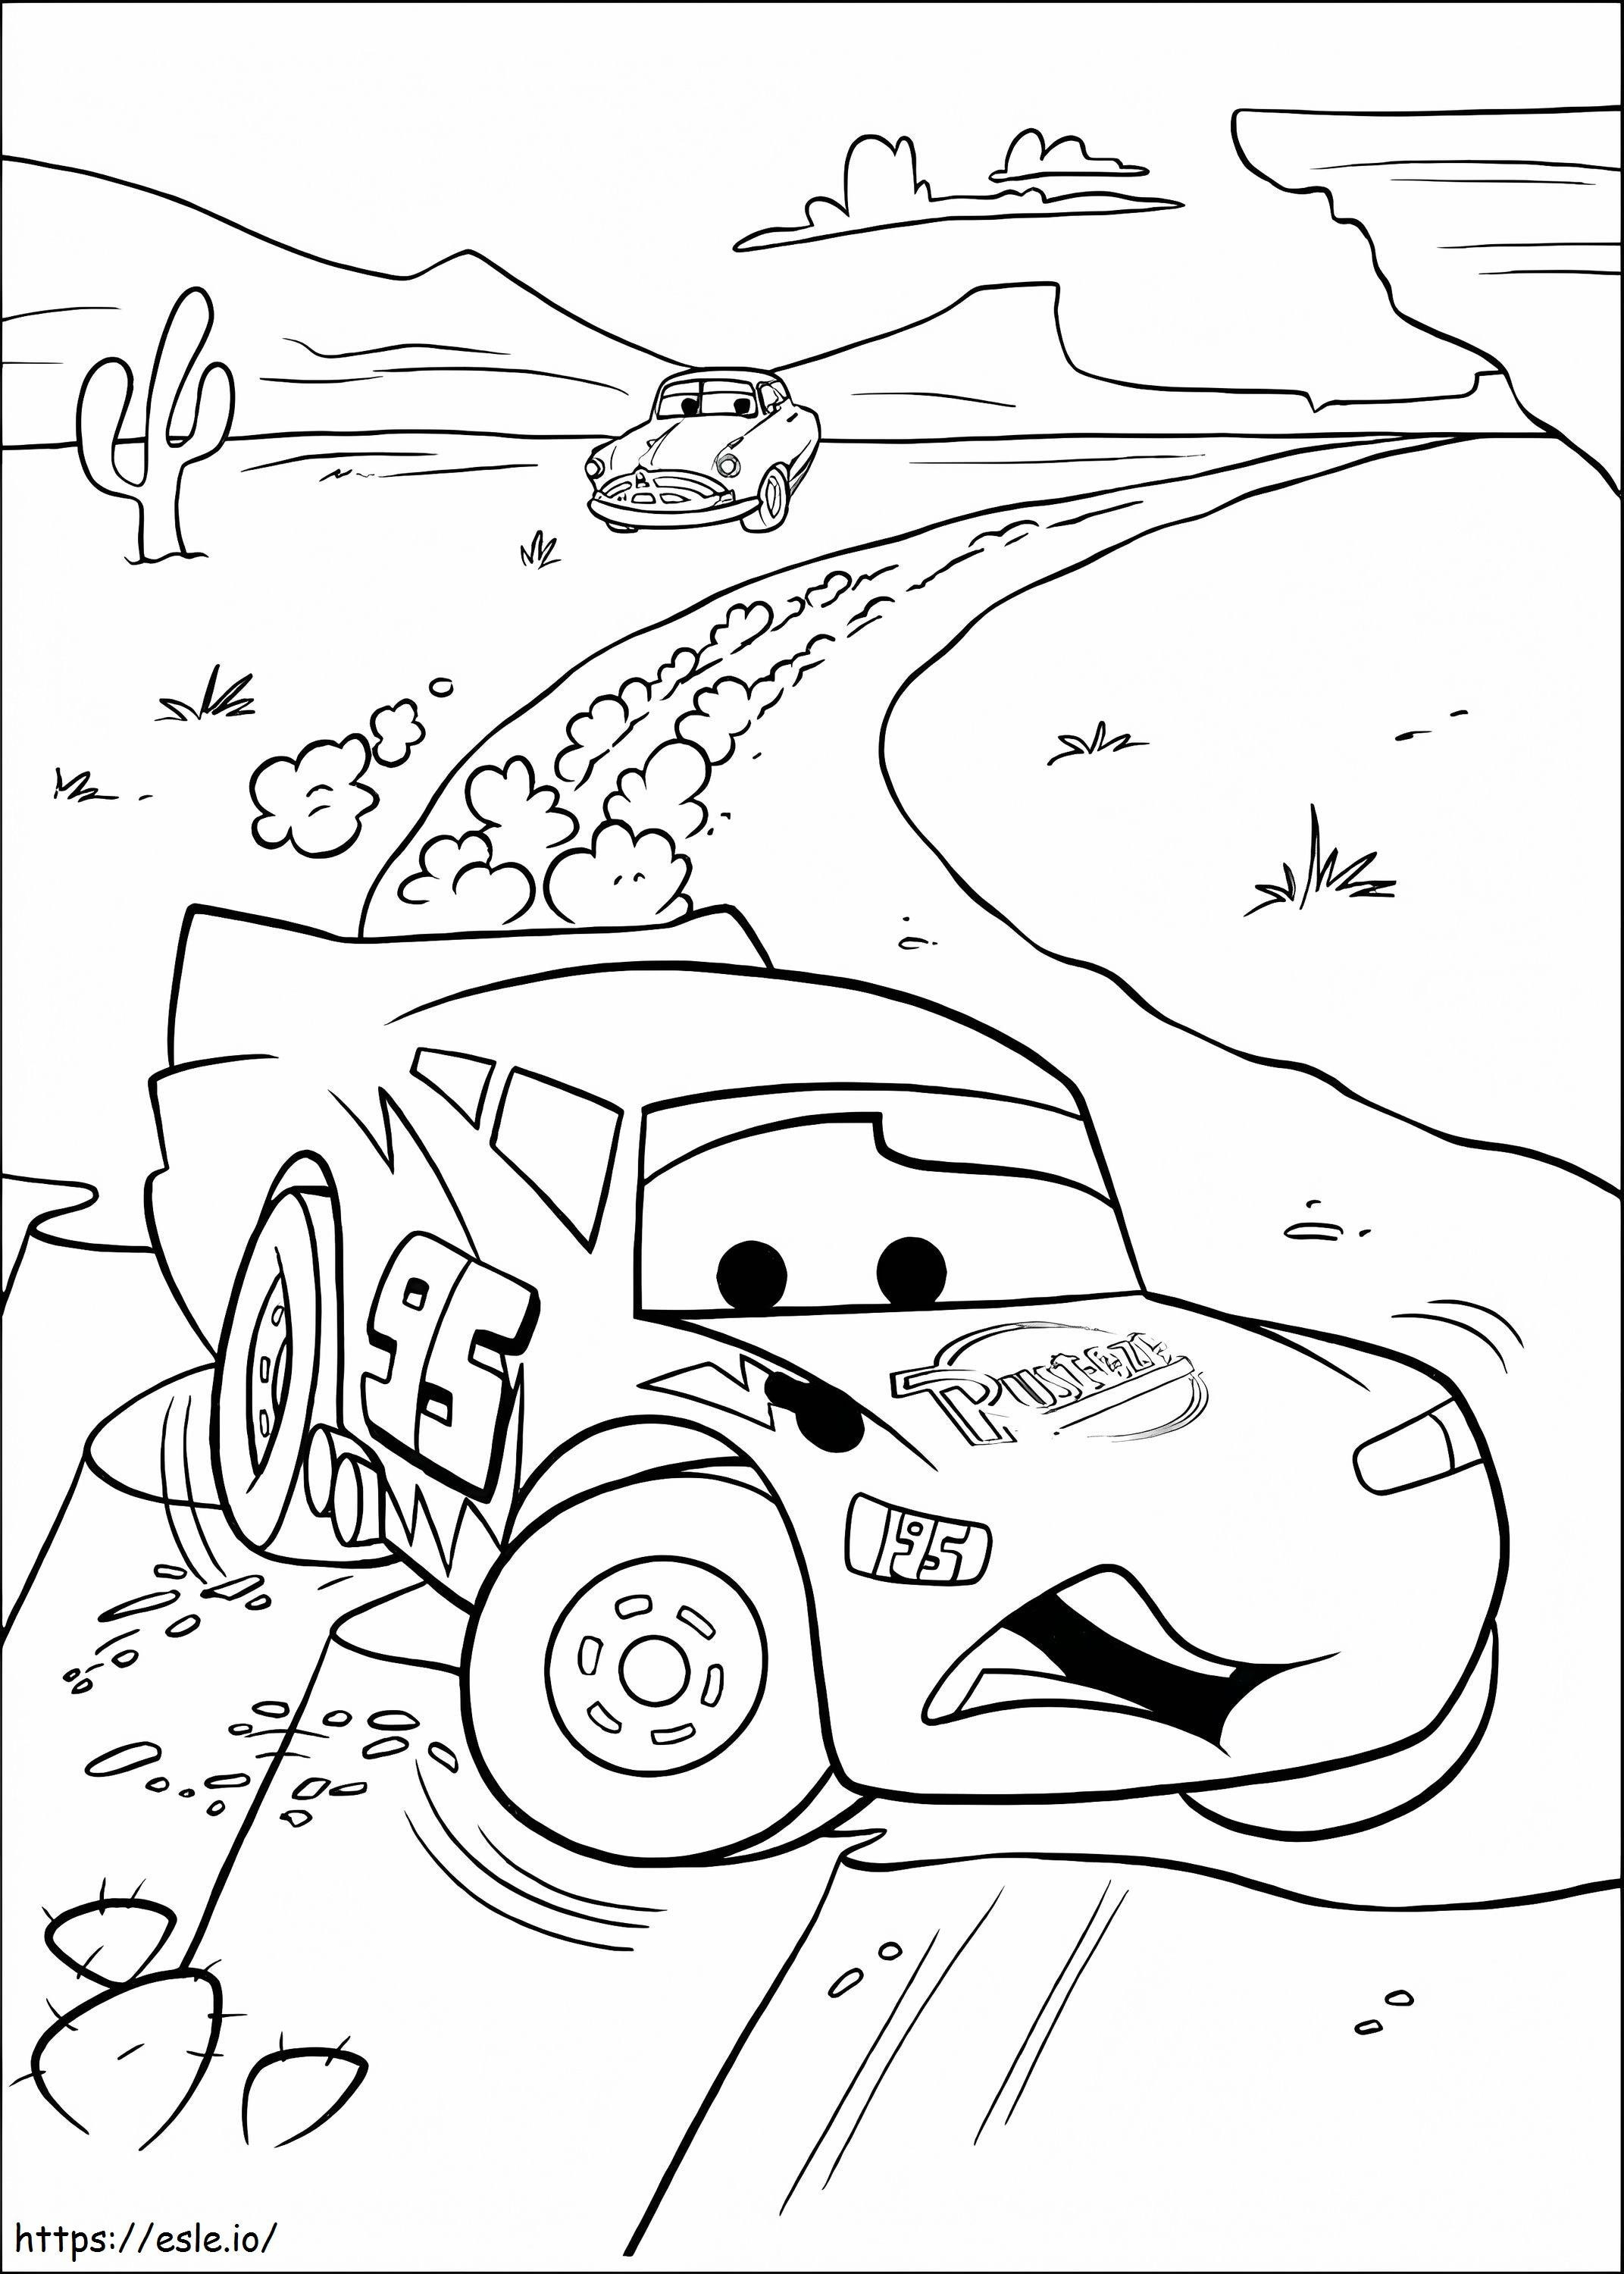  Lightning Mcqueen Color Page Lightning Lightning Free Lovely Lightning For Lightning Lightning Mcqueen Pictures para colorear